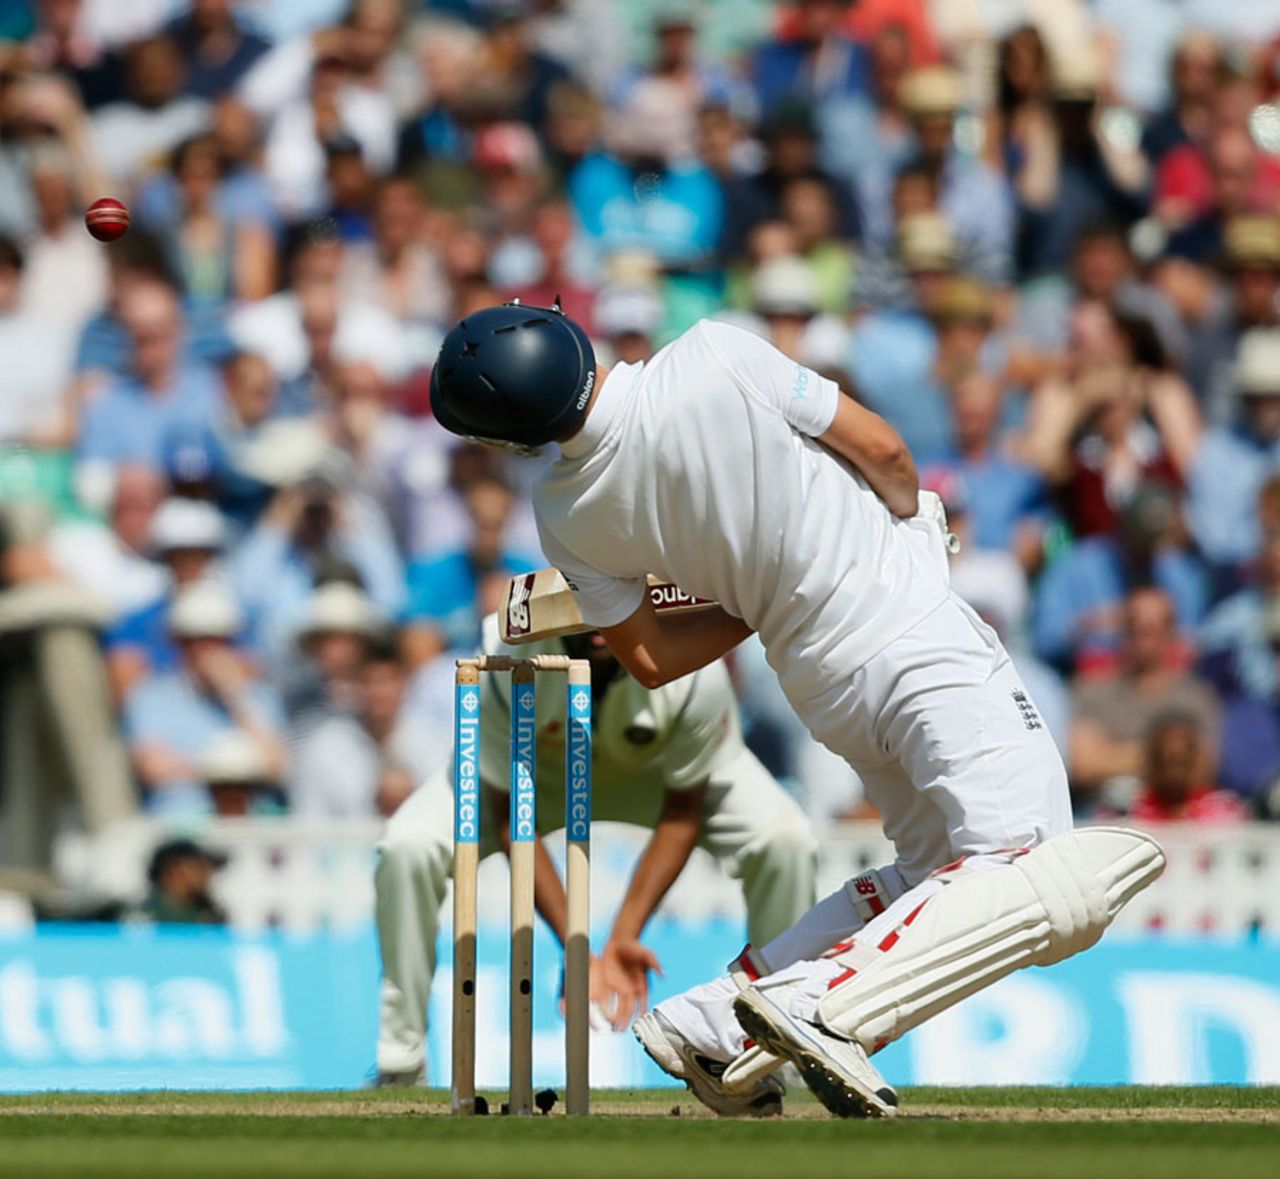 Gary Ballance weaves away from a short ball, England v India, 5th Investec Test, The Oval, 2nd day, August 16, 2014